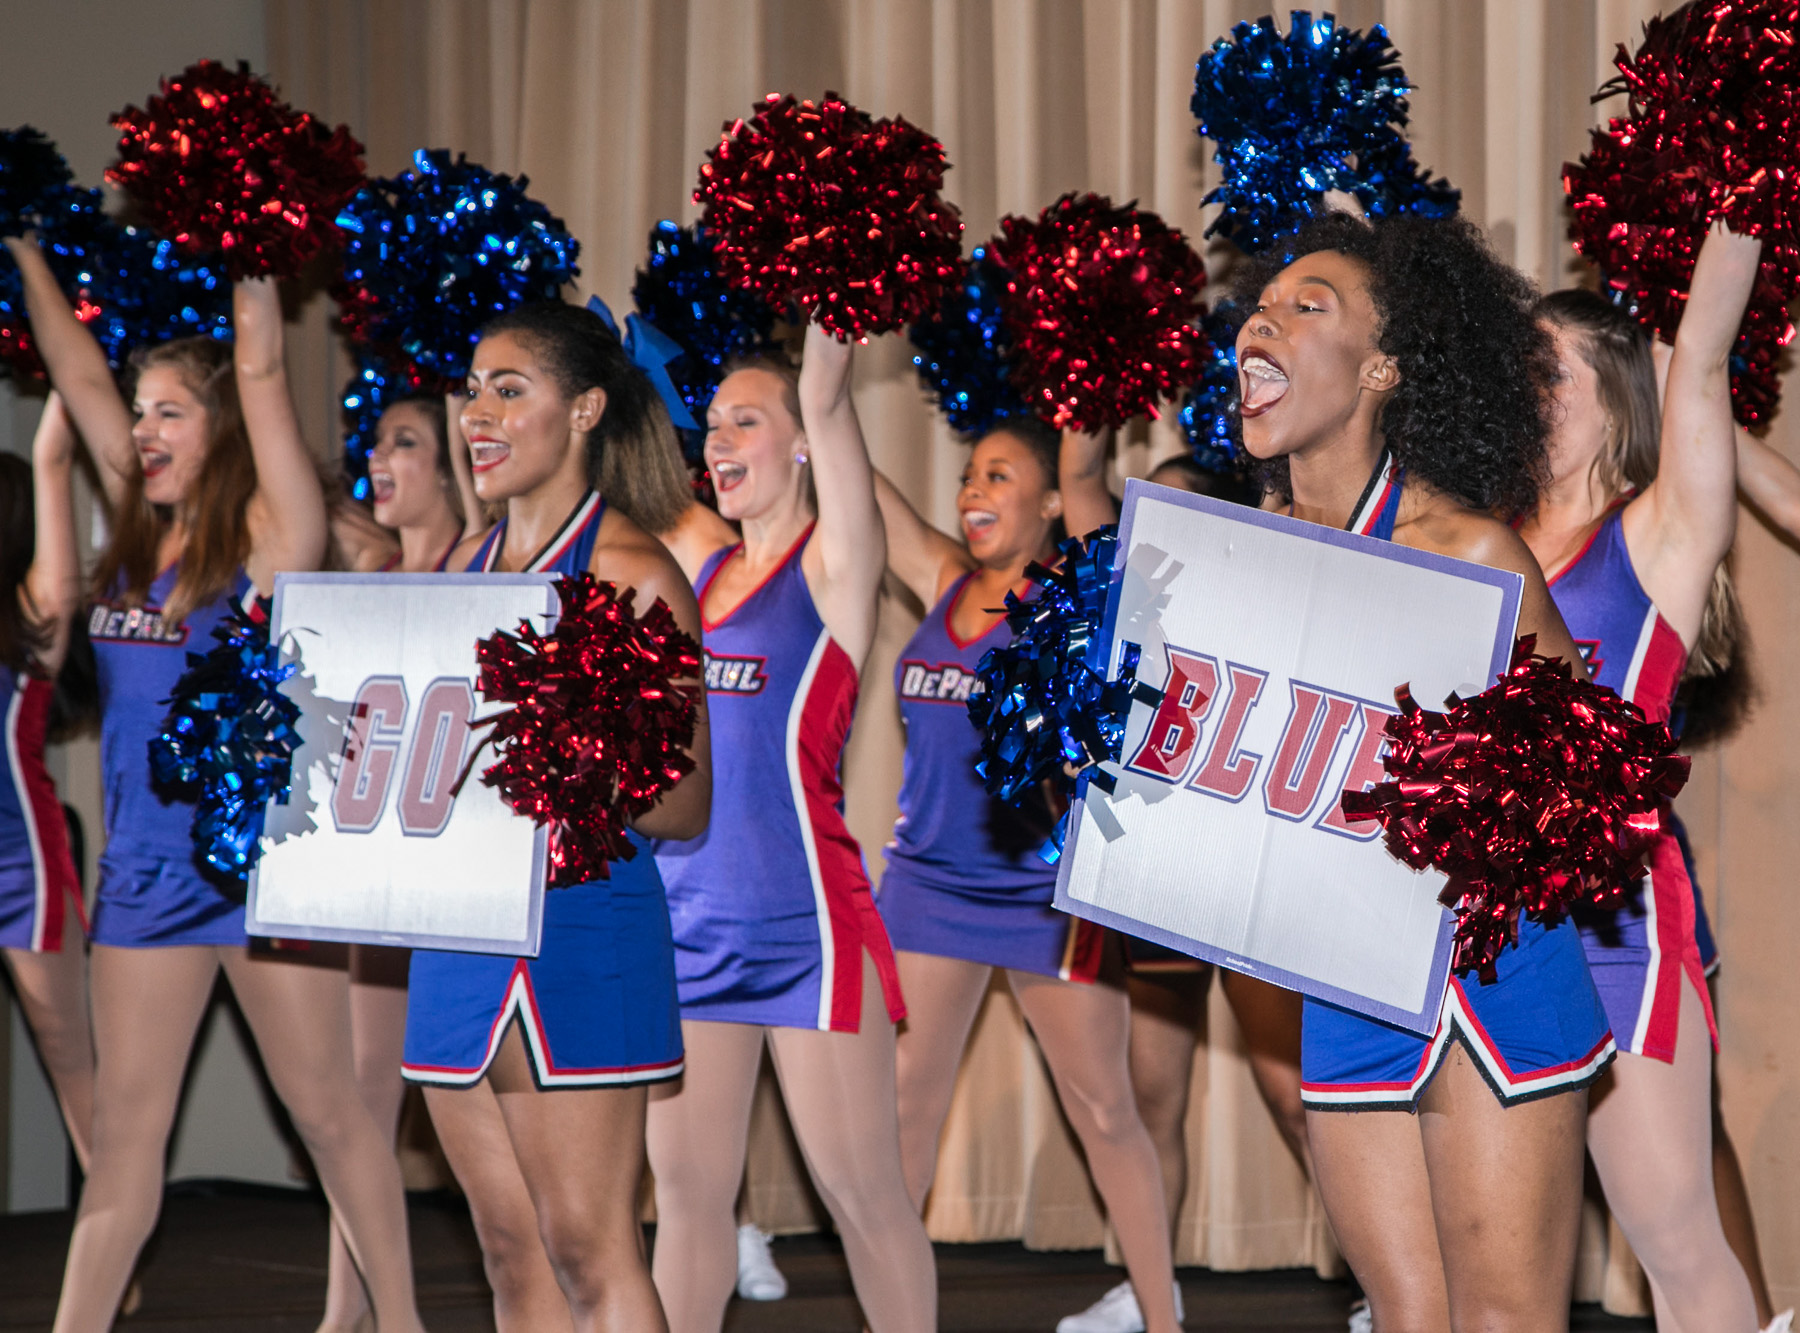 Members of the DePaul University Dance and Cheer Teams warm up the crowd during the Family Weekend Kickoff party. (DePaul University/Jamie Moncrief)